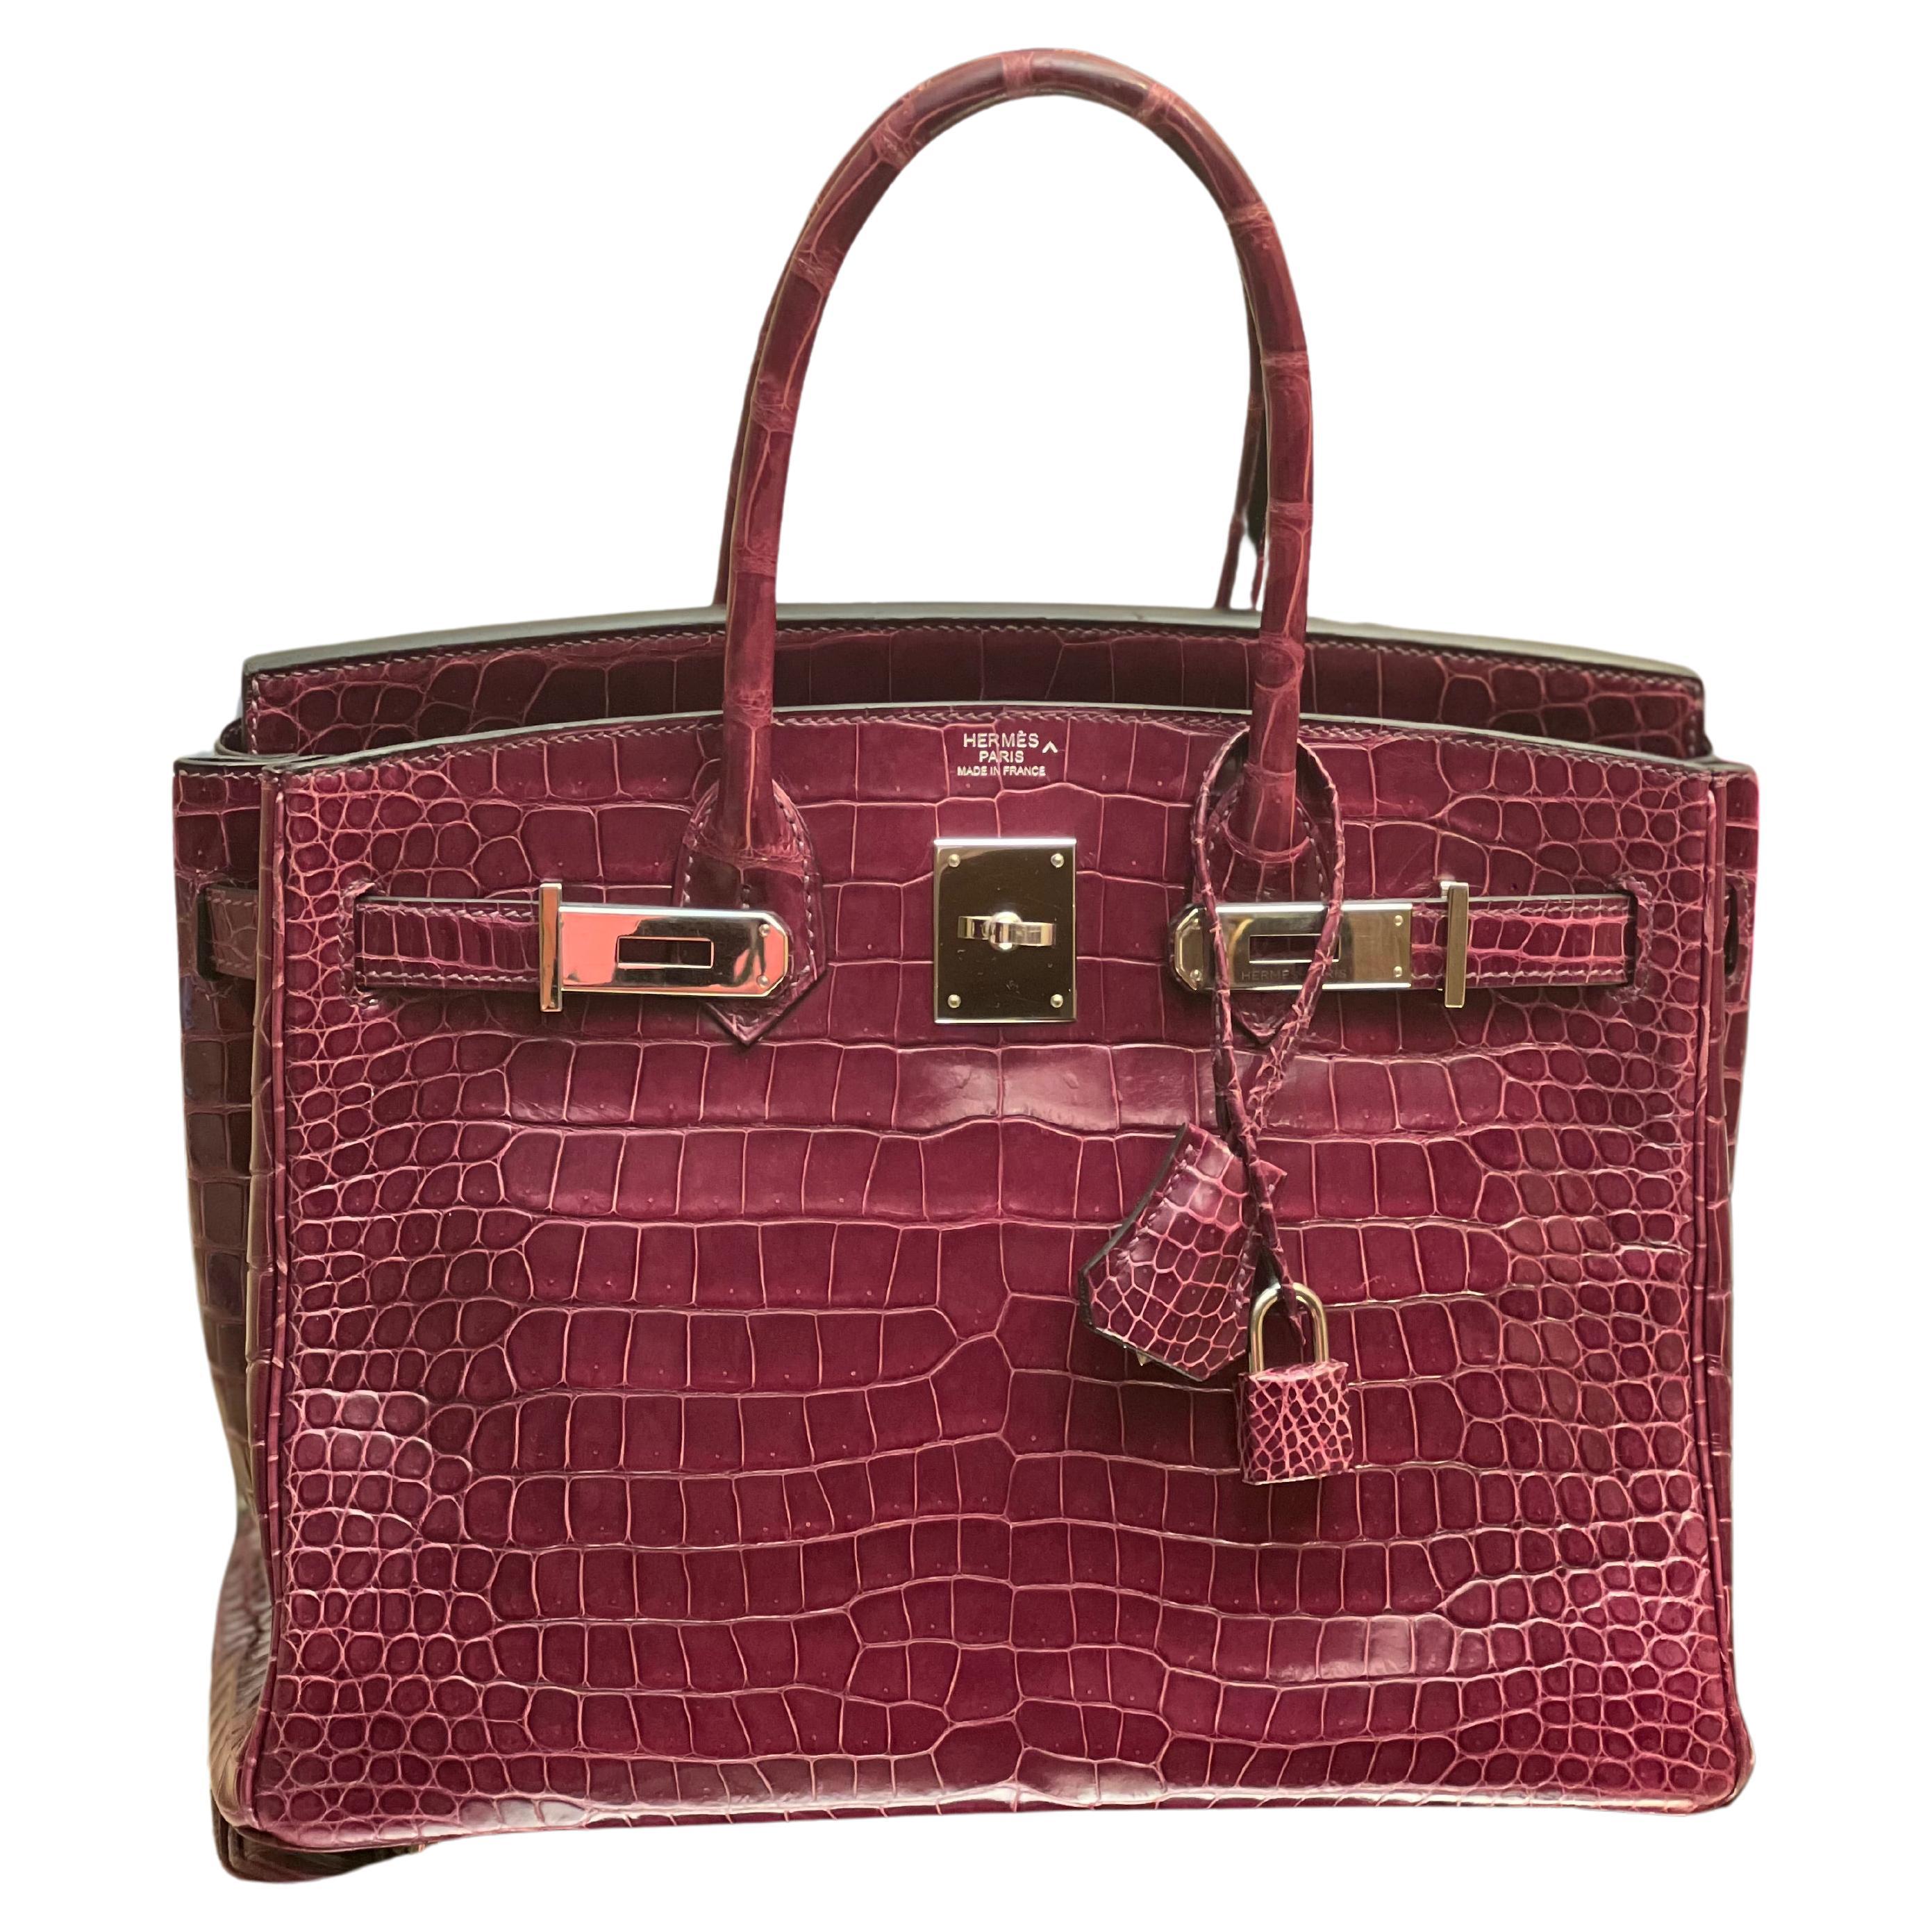 Beautiful purple Pre owned Hermes Birkin 30 crocodile Porosus bag. PHW. Comes with receipt, box, rain coat,clochette ,keys,locker and dust bag.
2014 year. Stamp R. 
Bag was at Hermes store and had make-up finishing, has invoice as well from Hermes